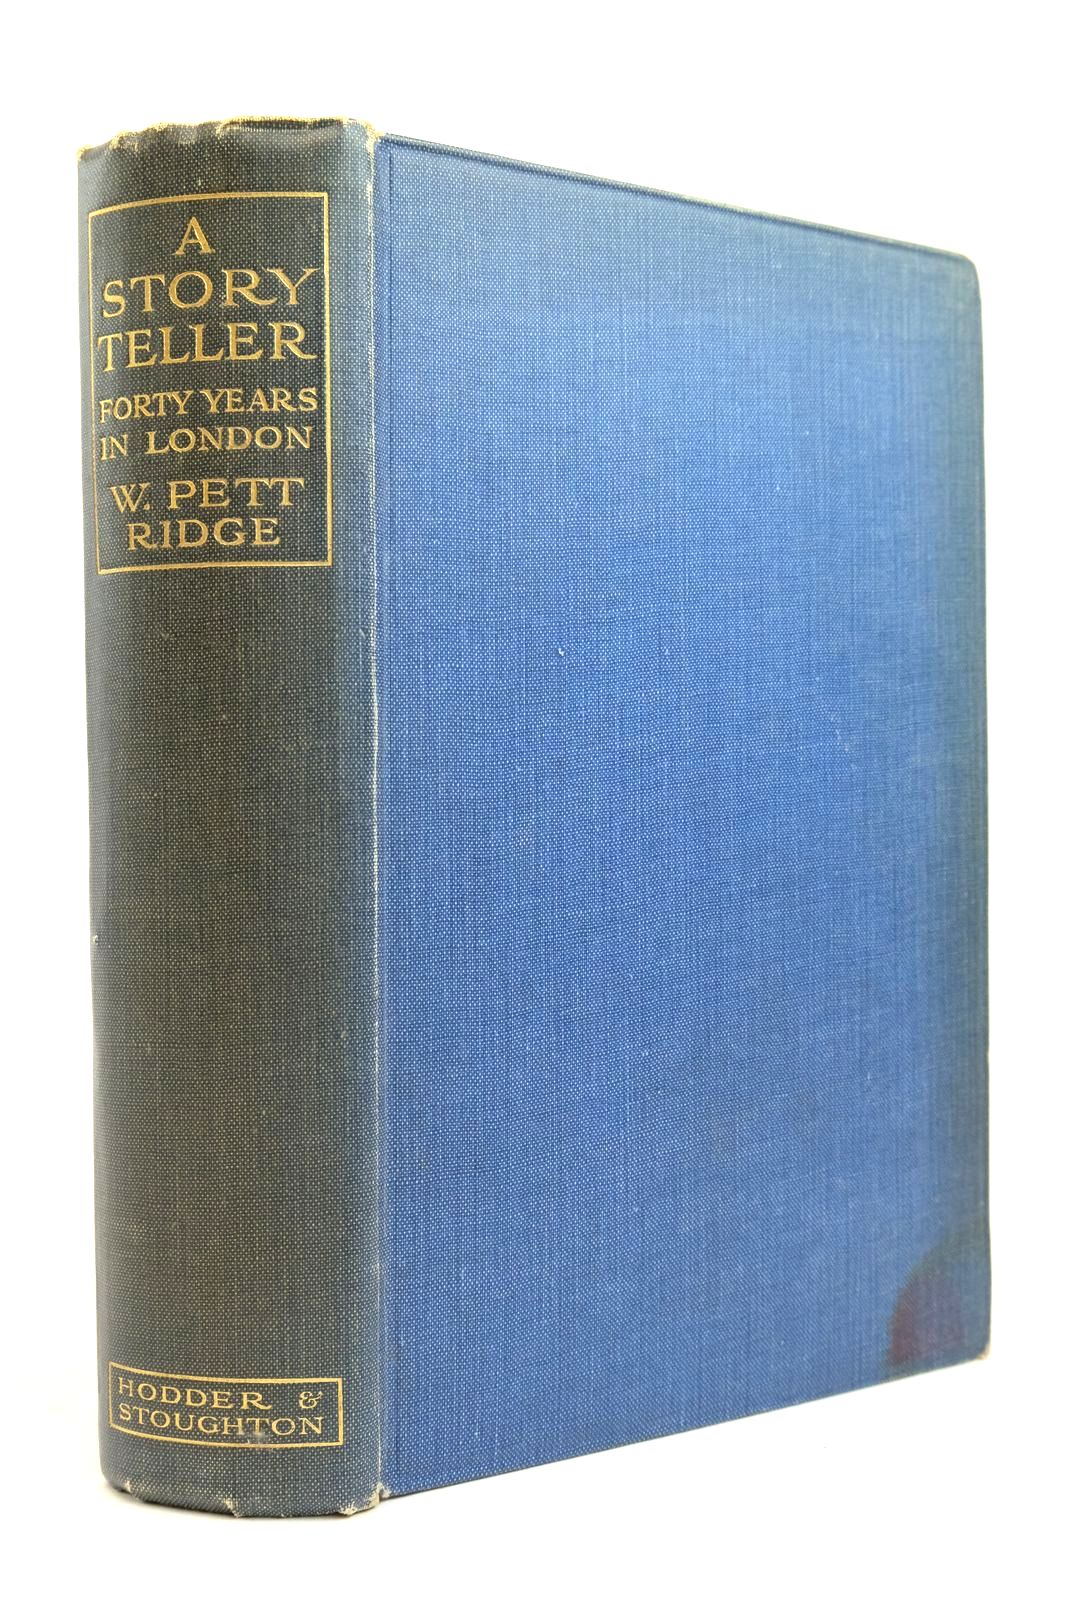 Photo of A STORY TELLER FORTY YEARS IN LONDON written by Ridge, W. Pett published by Hodder & Stoughton (STOCK CODE: 2134807)  for sale by Stella & Rose's Books